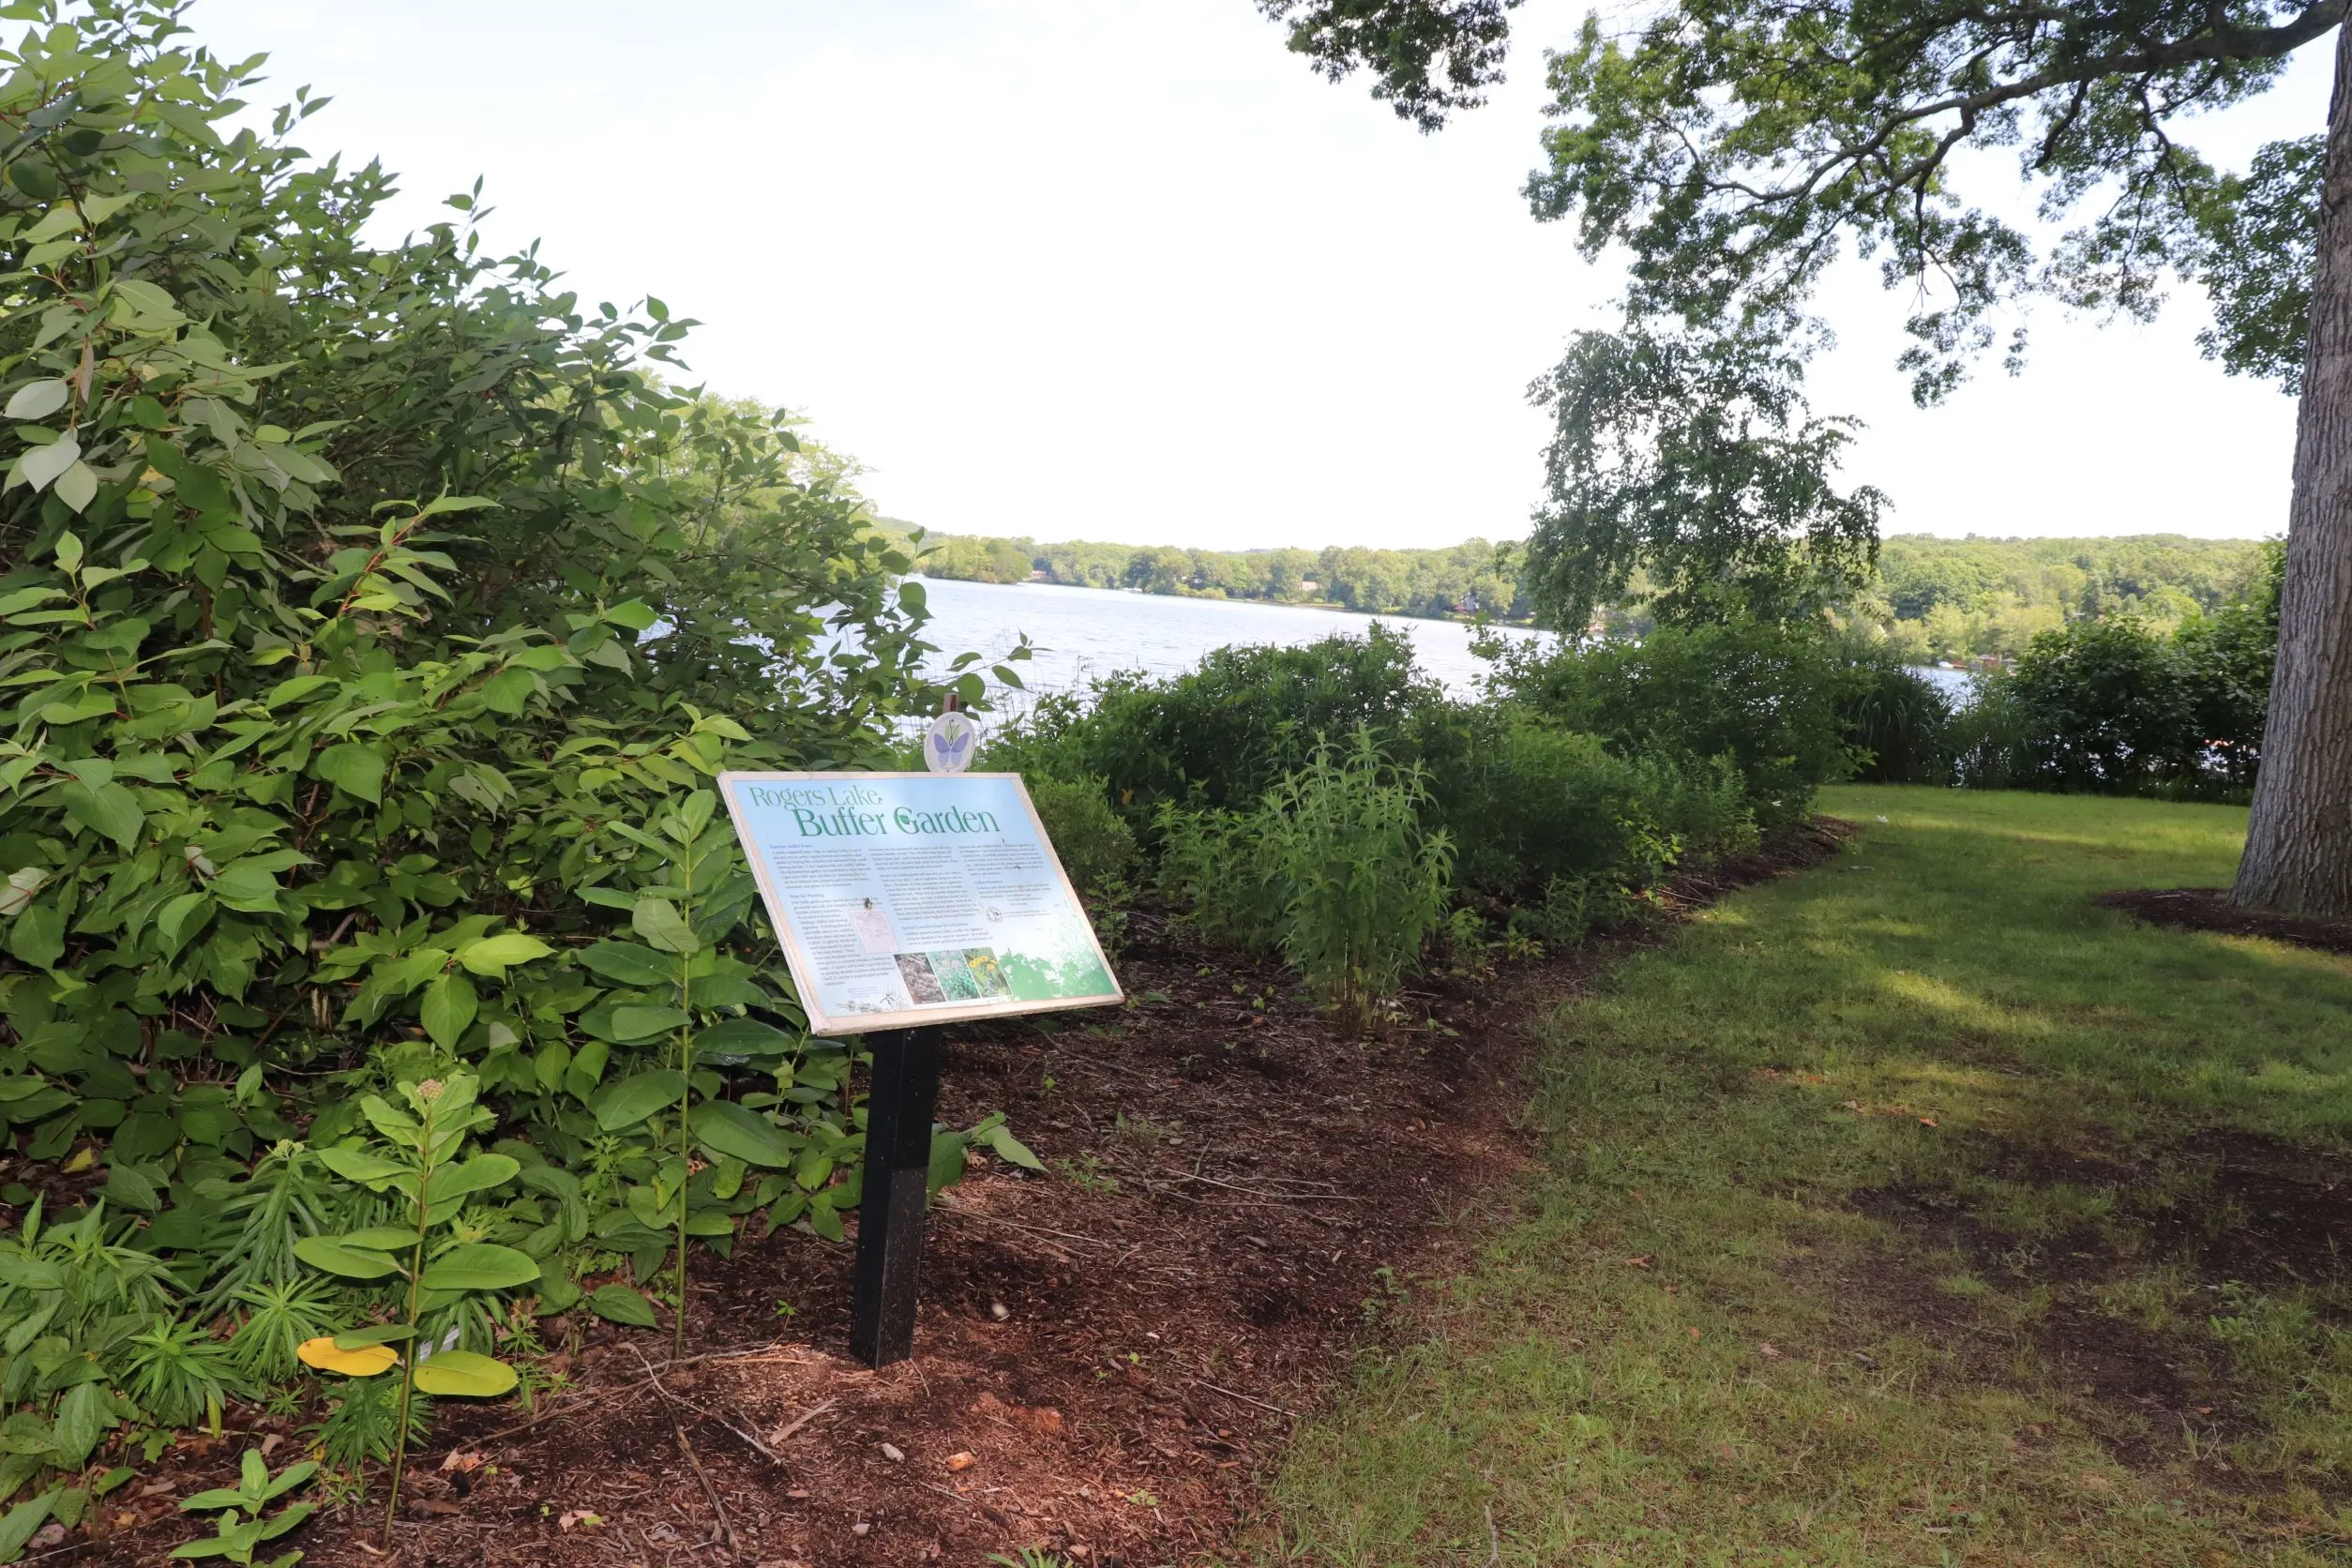 Image of Buffer Garden at Haines Park at Rogers Lake in Old Lyme, CT.